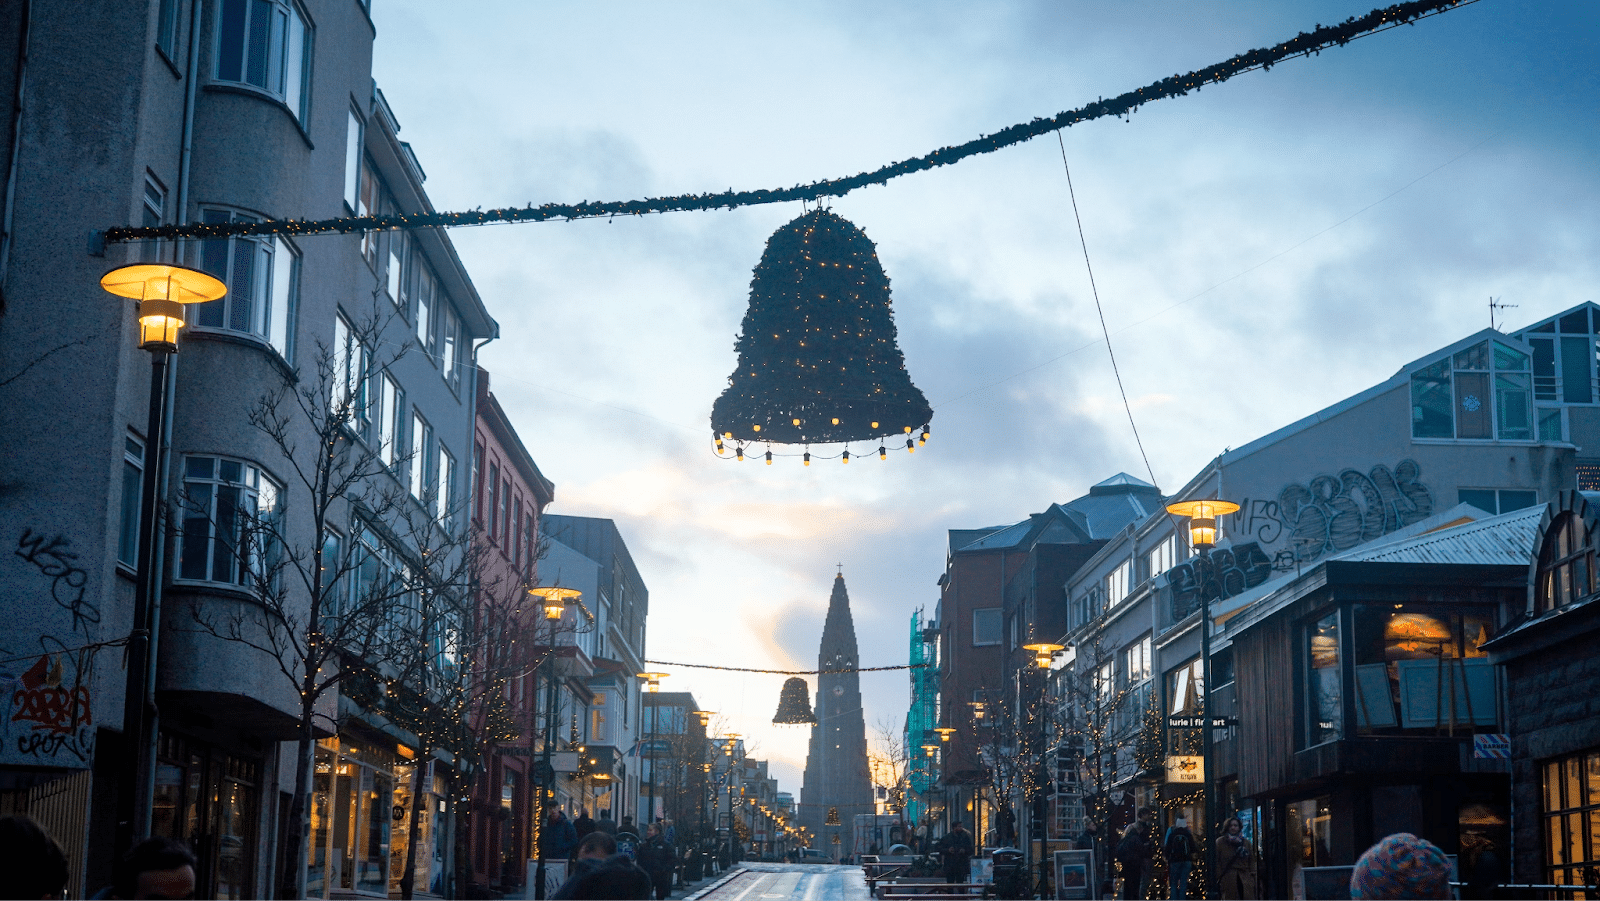 Reykjavik - 10 Perfect Destinations for A Magical Christmas Holiday